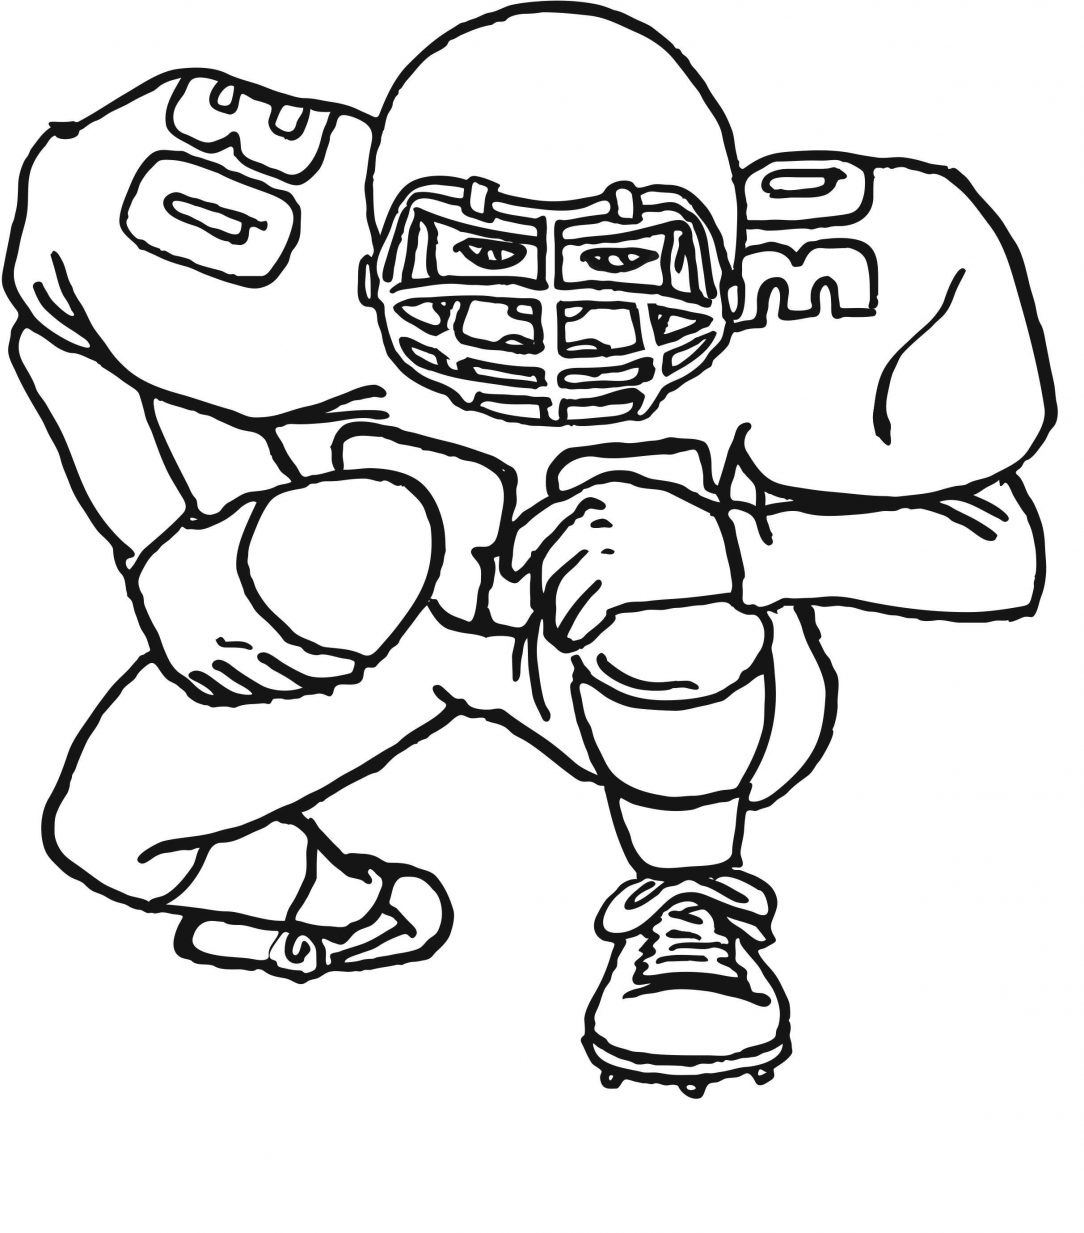 Coloring Ideas : Astonishing Football Helmet Coloring Pages Football - Free Printable Seahawks Coloring Pages